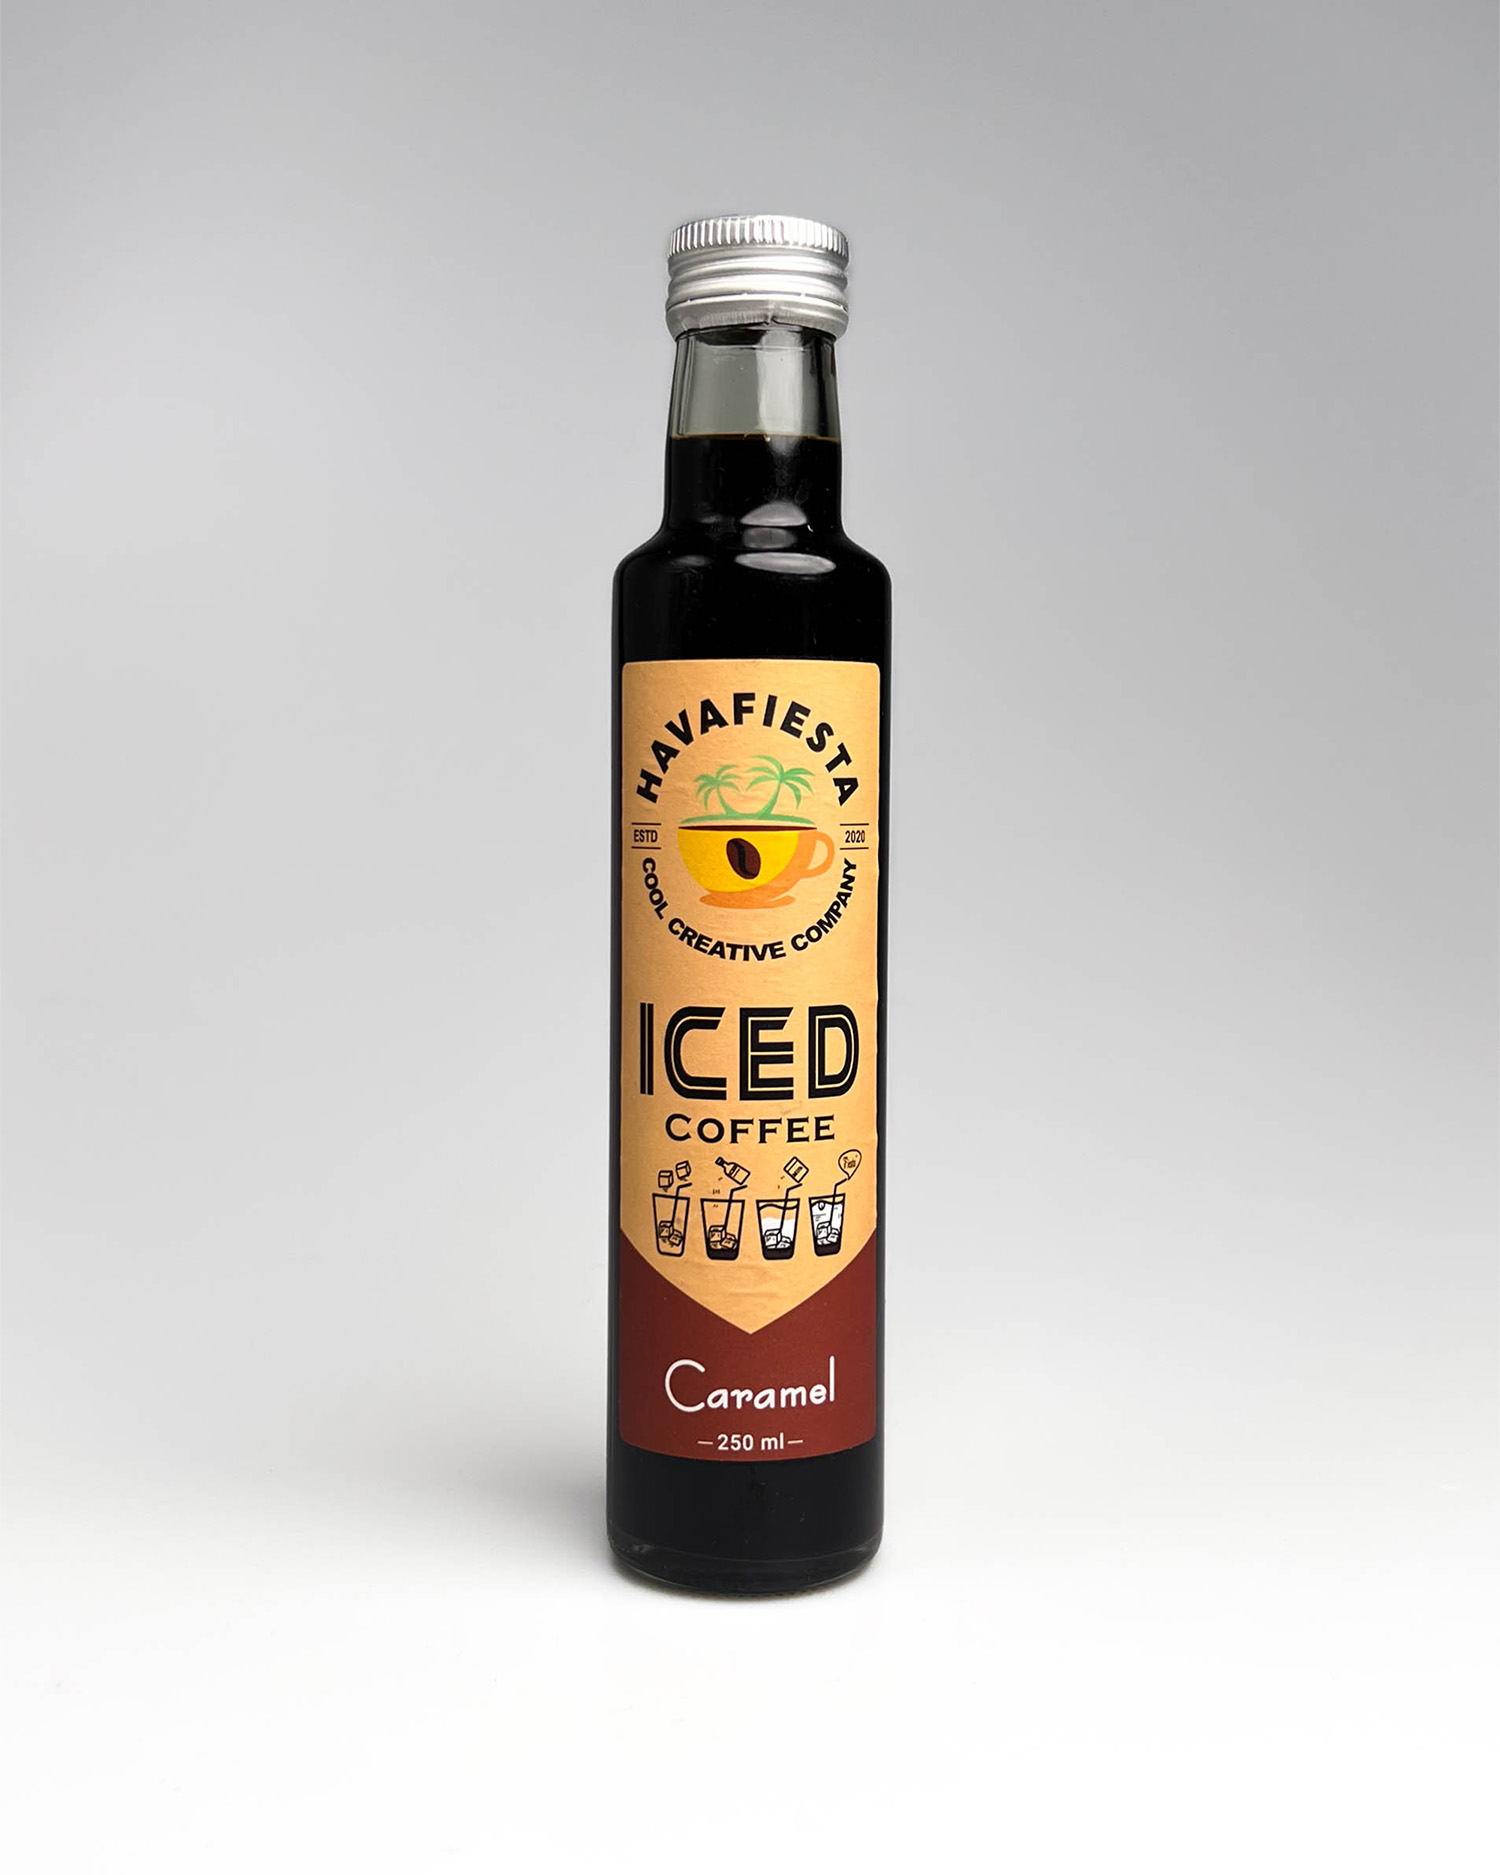 product photos of iced coffee